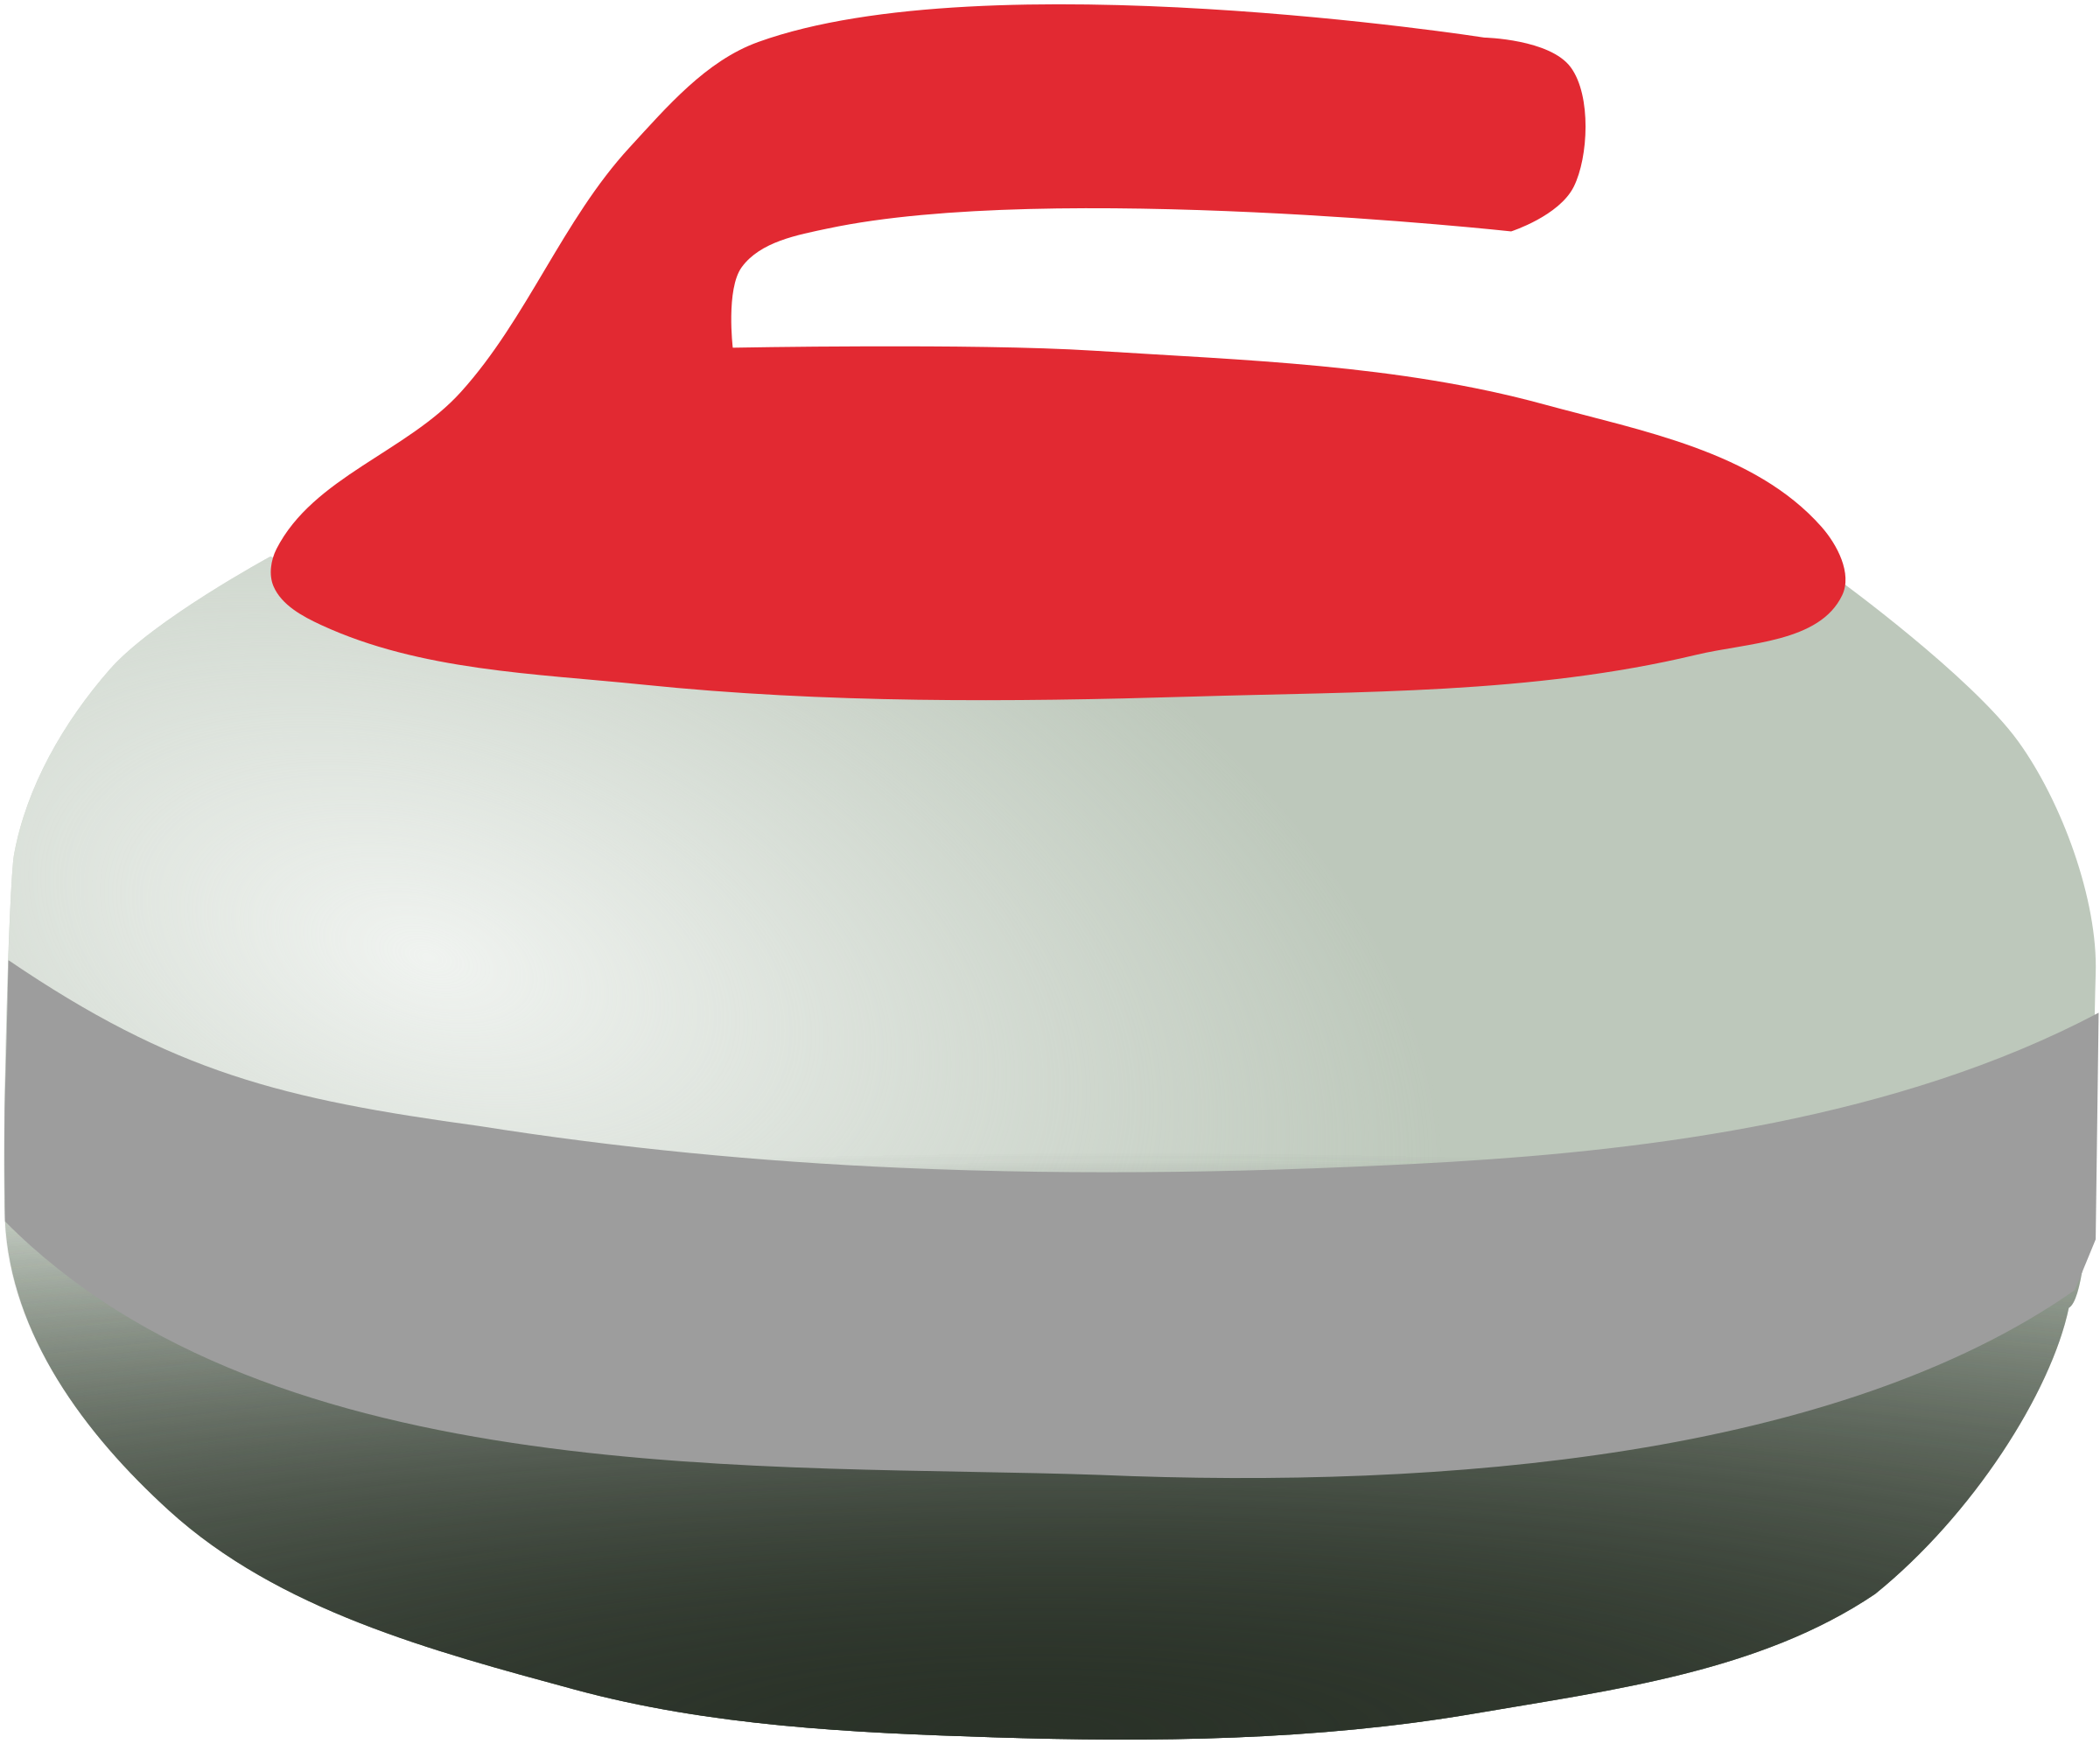 curling rings clipart - photo #19